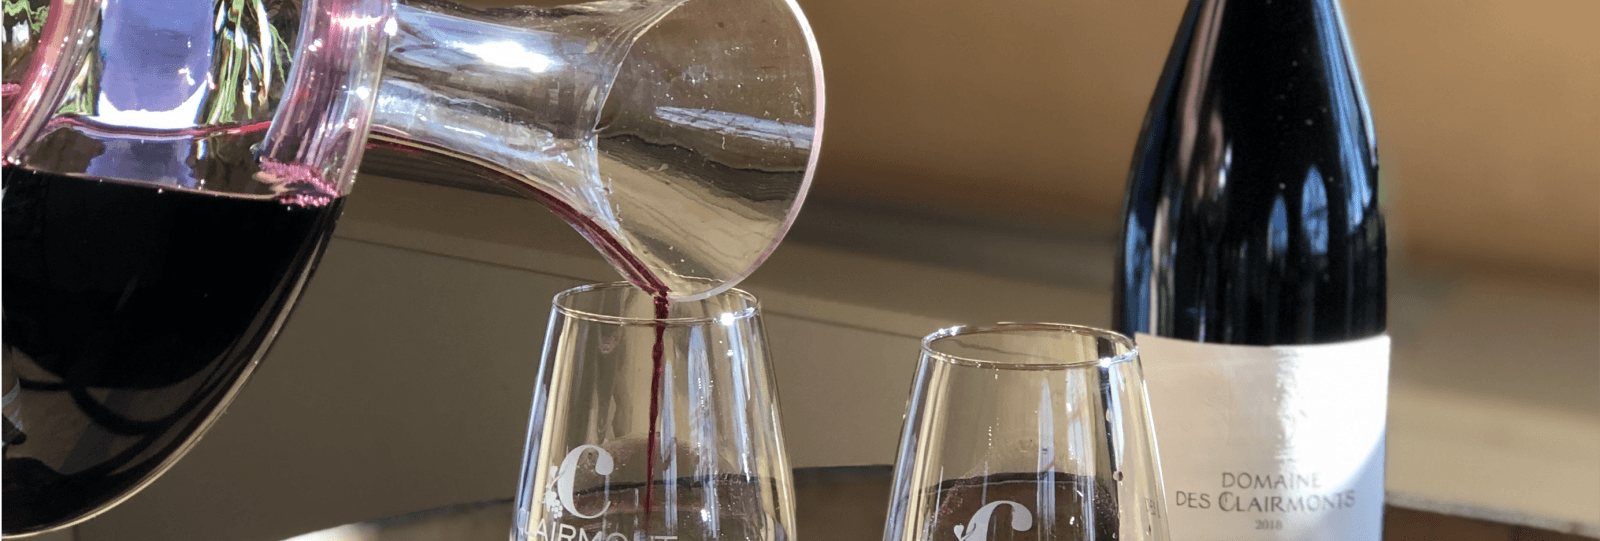 Tasting workshop at the Clairmont cellar